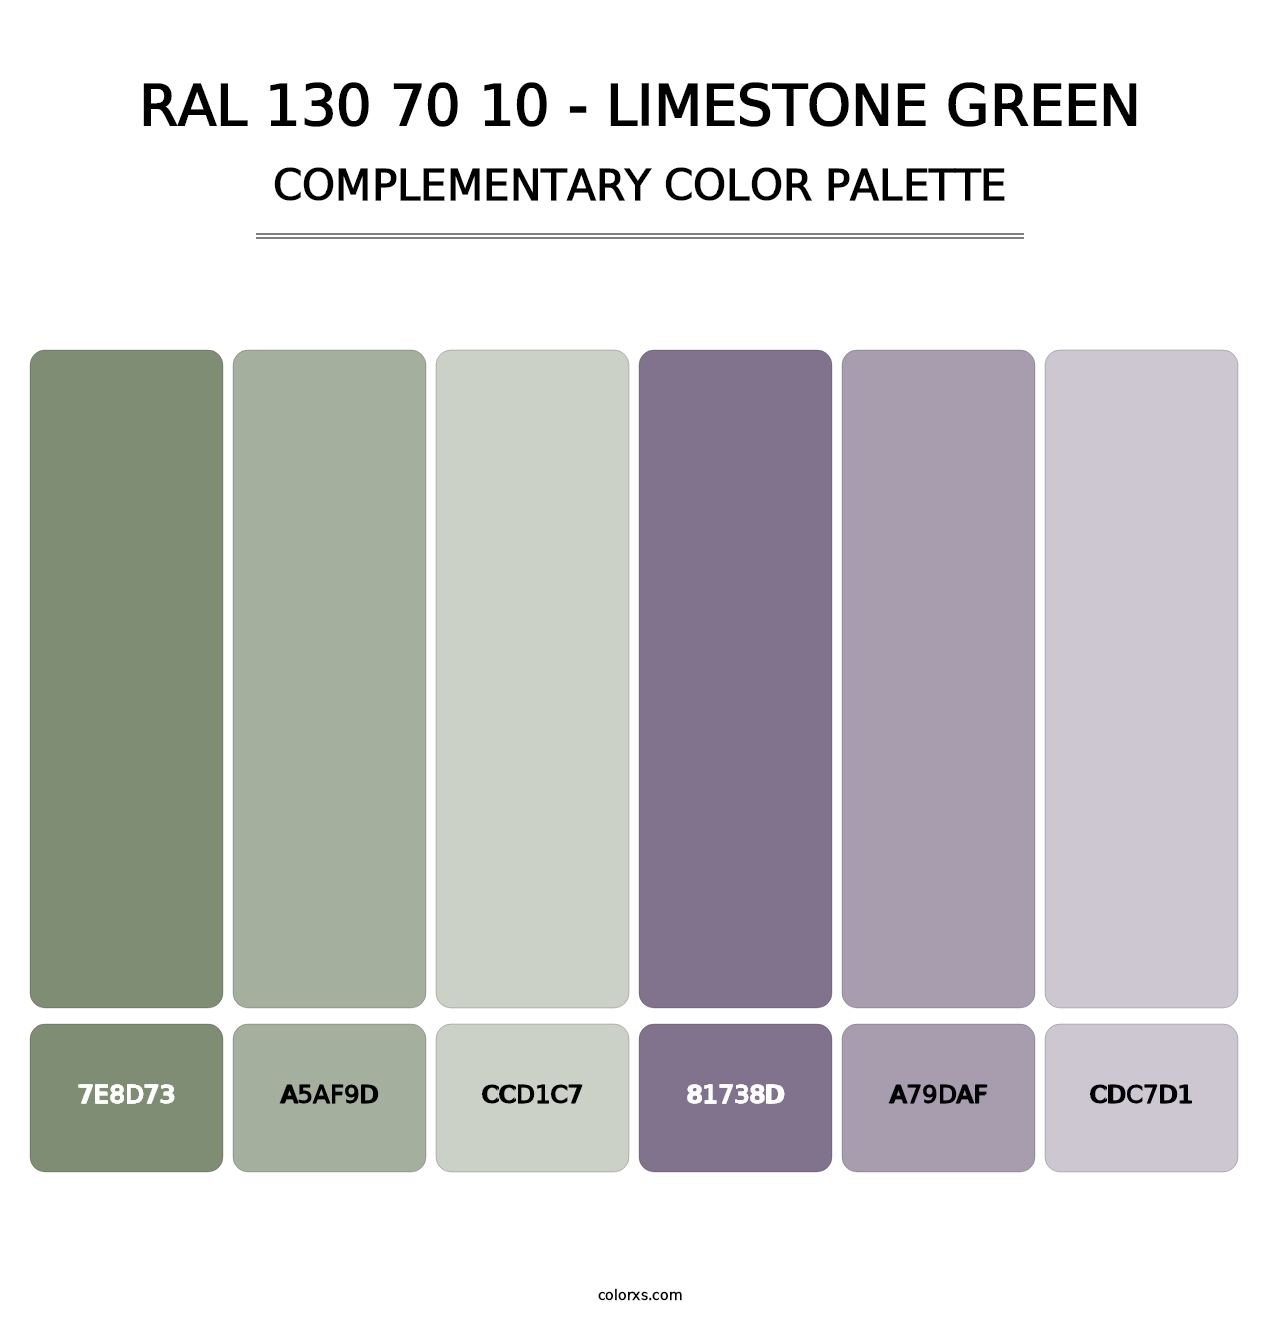 RAL 130 70 10 - Limestone Green - Complementary Color Palette